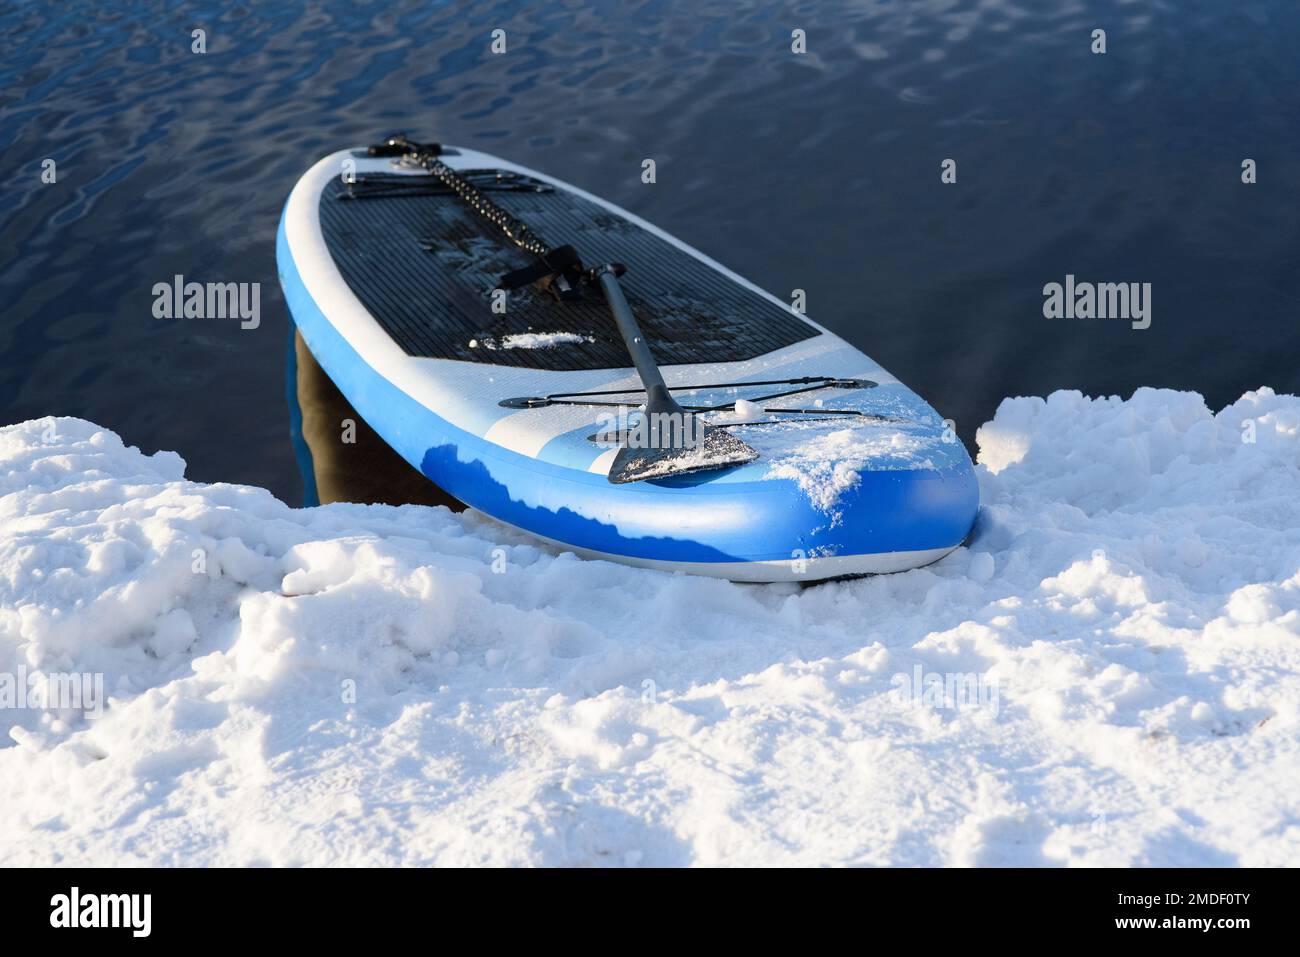 SUP board in snow and water in winter. Winter season and active leisure concept Stock Photo